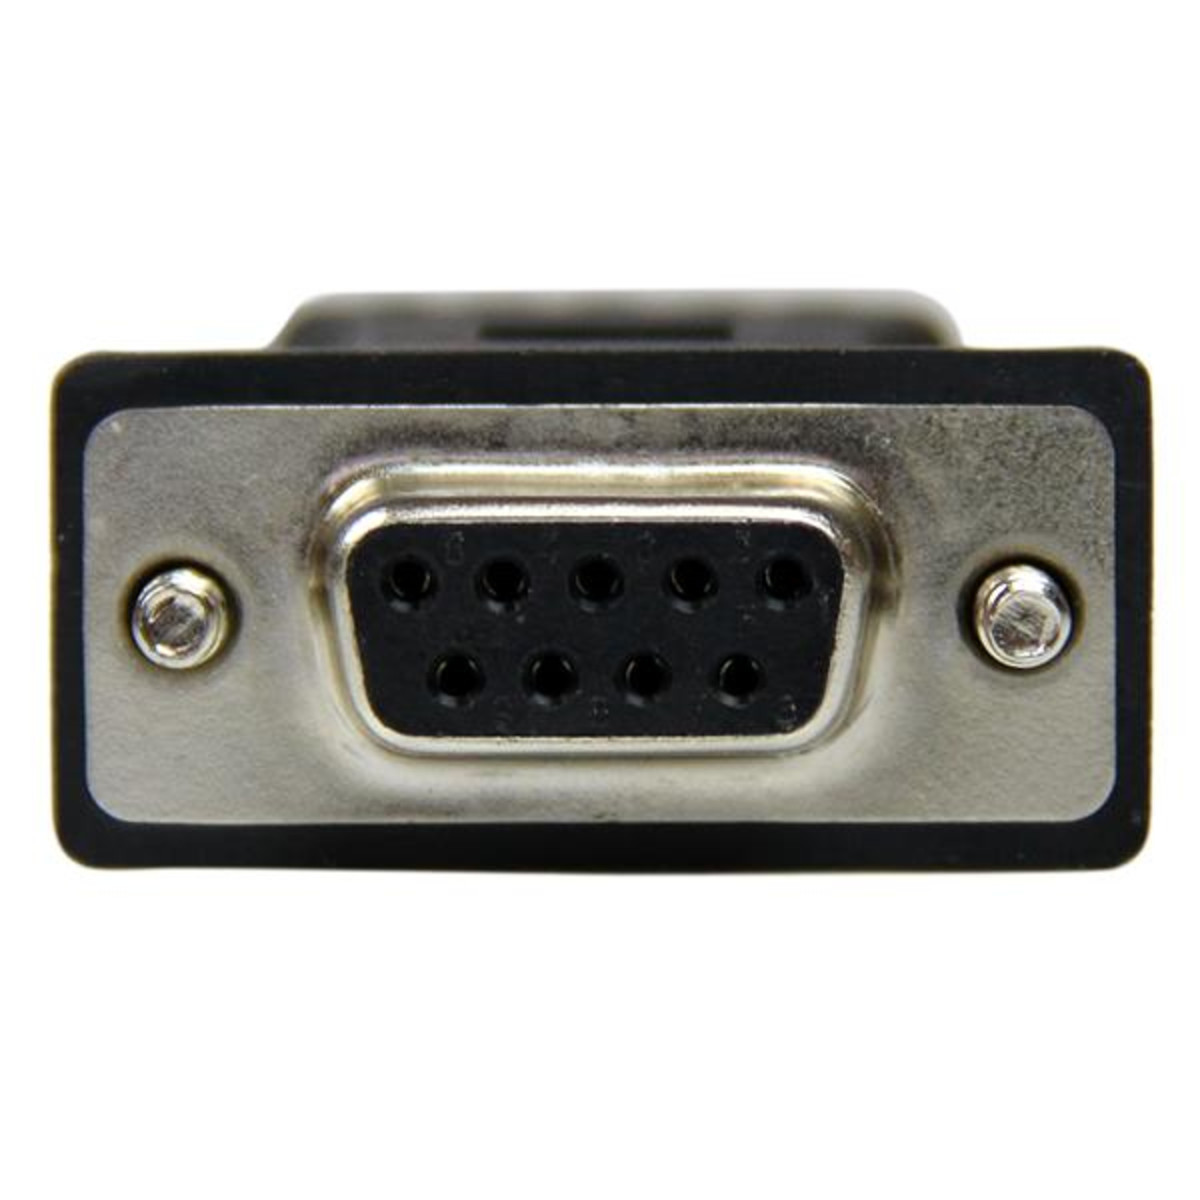 RS422 RS485 to Terminal Block Adapter